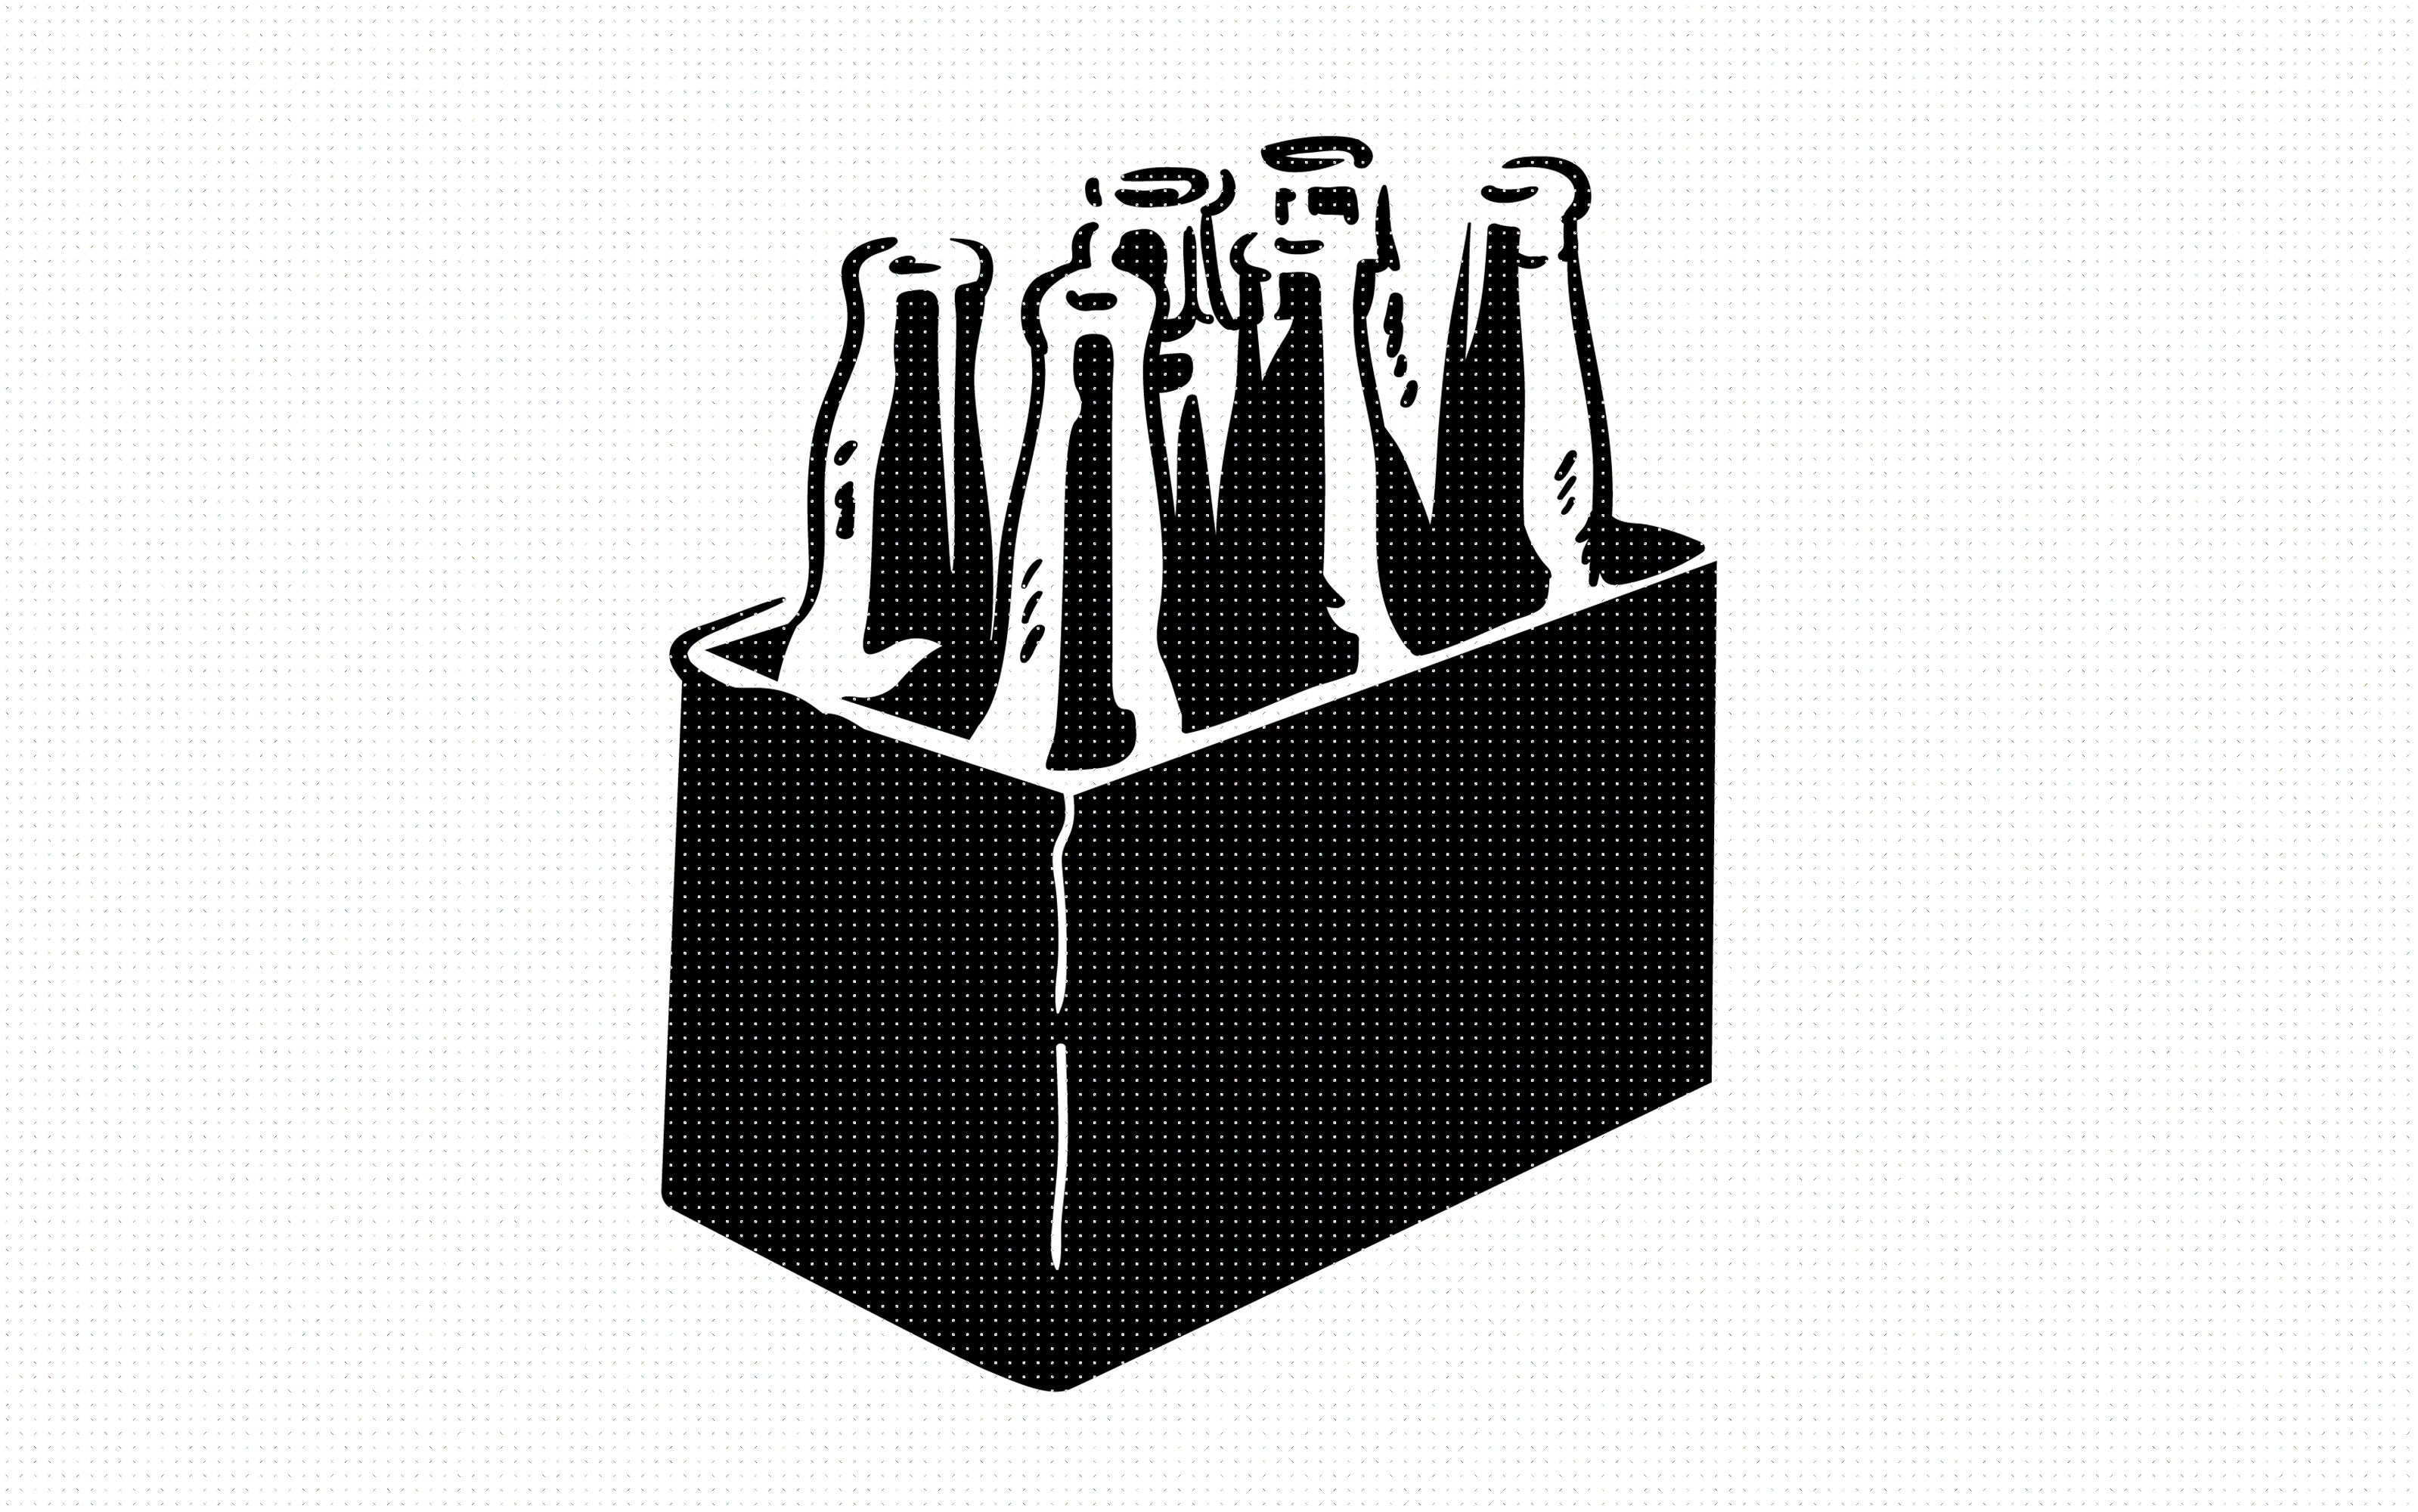 Beer Bottle Six Pack Holder Svg Dxf Vector Eps Clipart Cricut By Crafteroks Thehungryjpeg Com